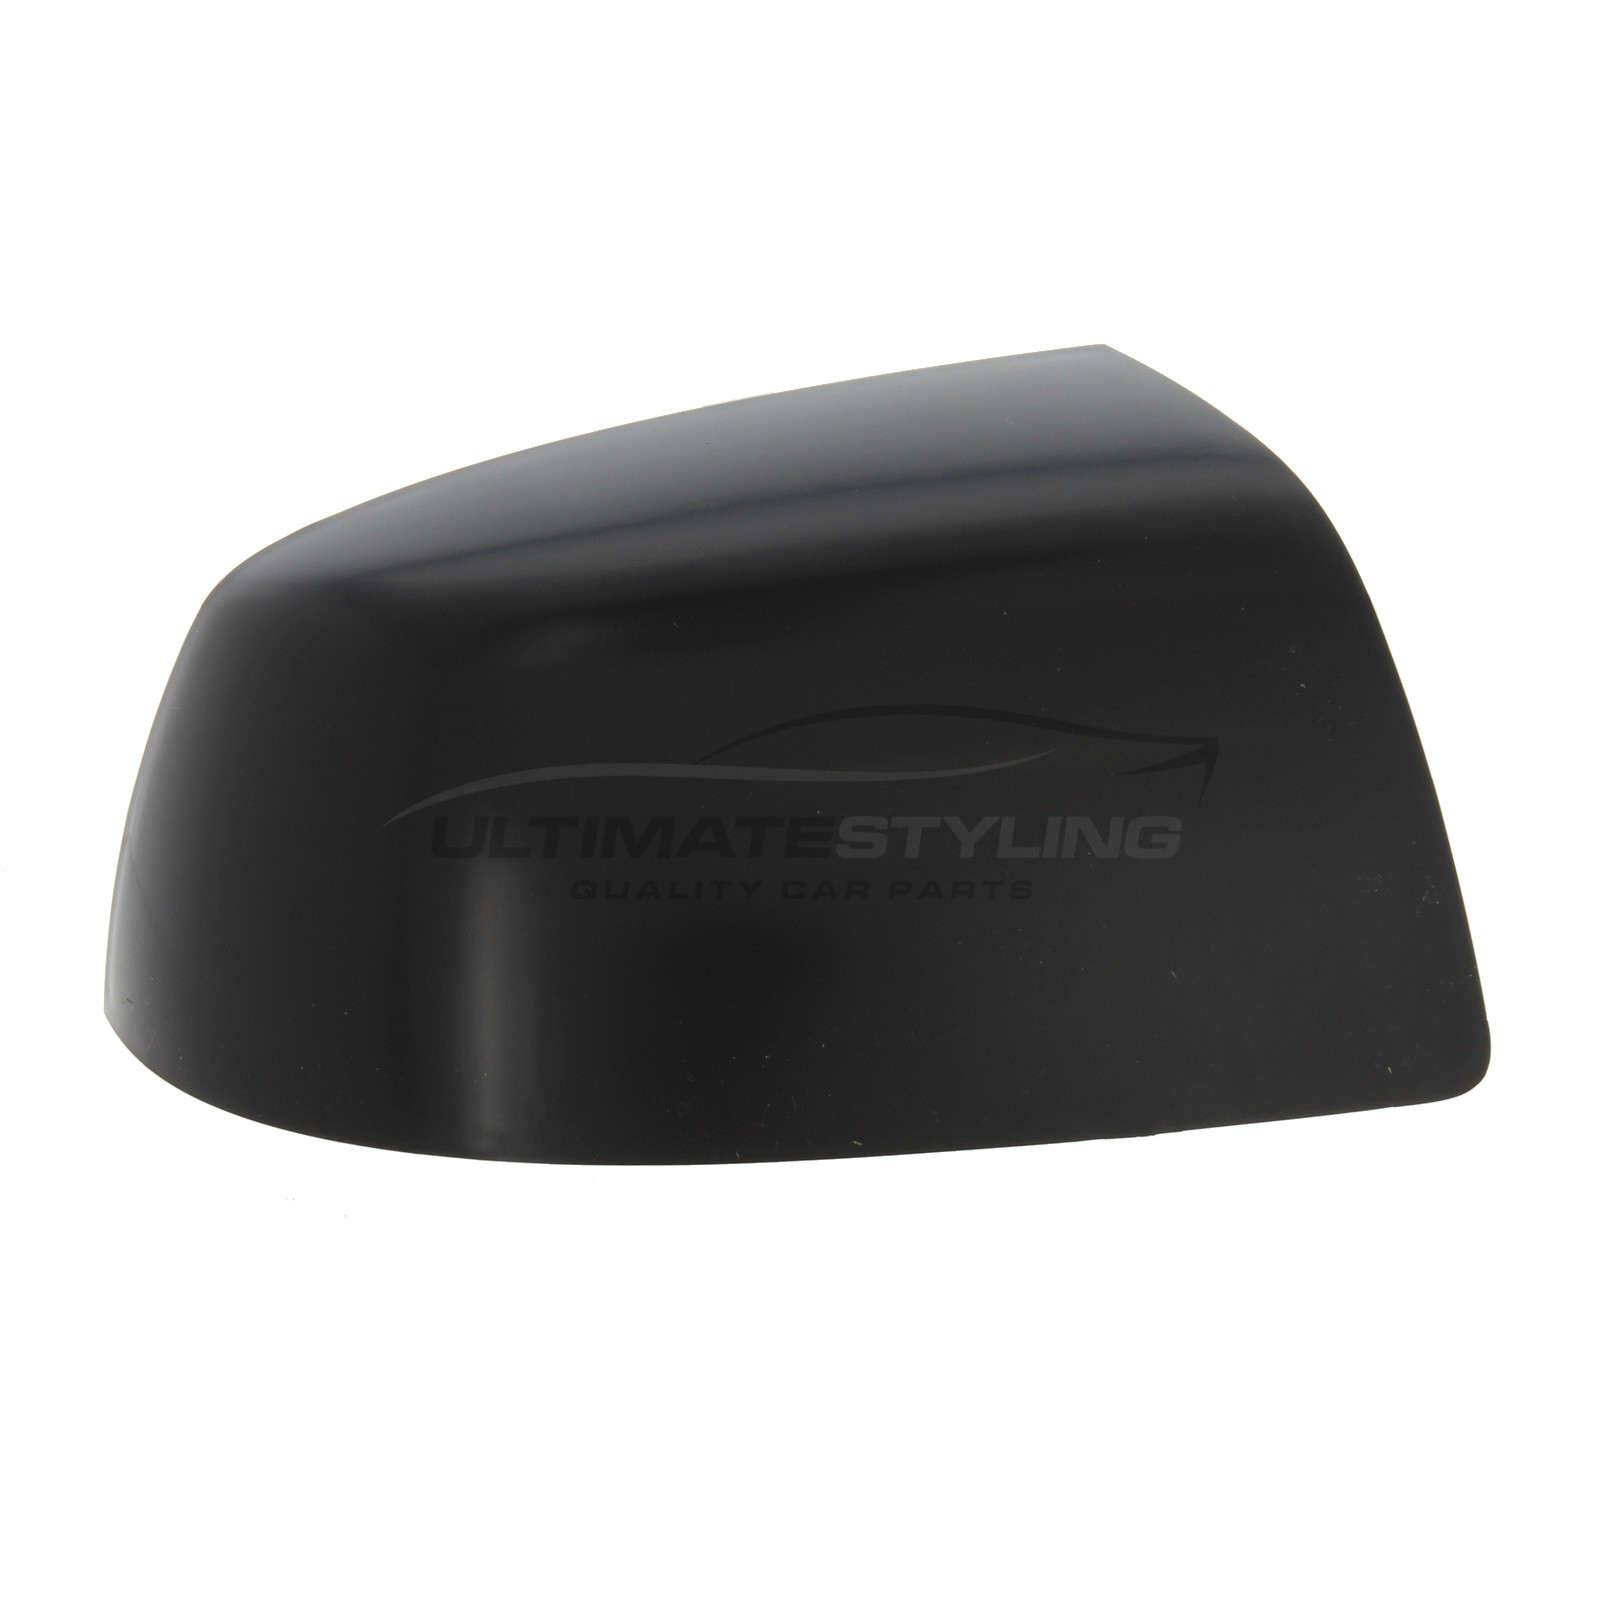 Ford C-MAX 2007-2011, Ford Fiesta 2002-2009, Ford Focus 2003-2012, Ford Fusion 2002-2012, Ford Mondeo 2000-2007 Wing Mirror Cover Cap Casing Matt Black Drivers Side (RH)